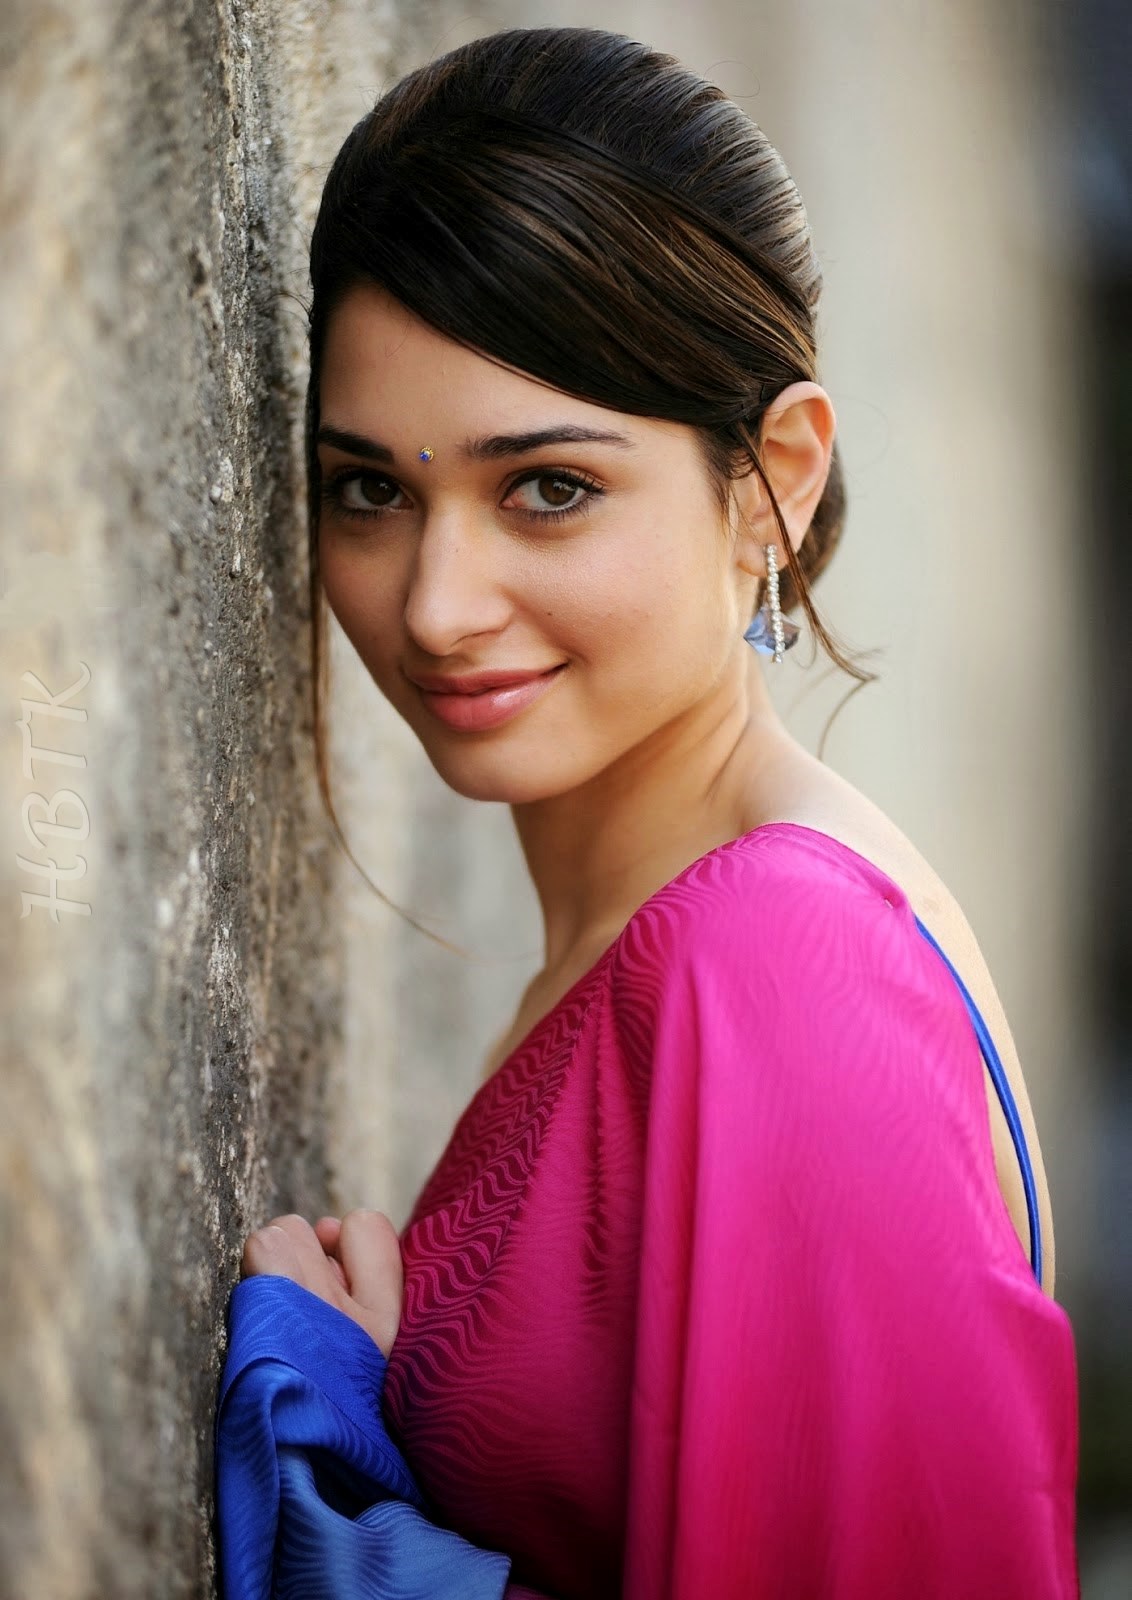 Hbtkollywood Tamanna Bhatia Looking Gorgeous In Pink And Blue Sari Wearing Sleeveless Blouse